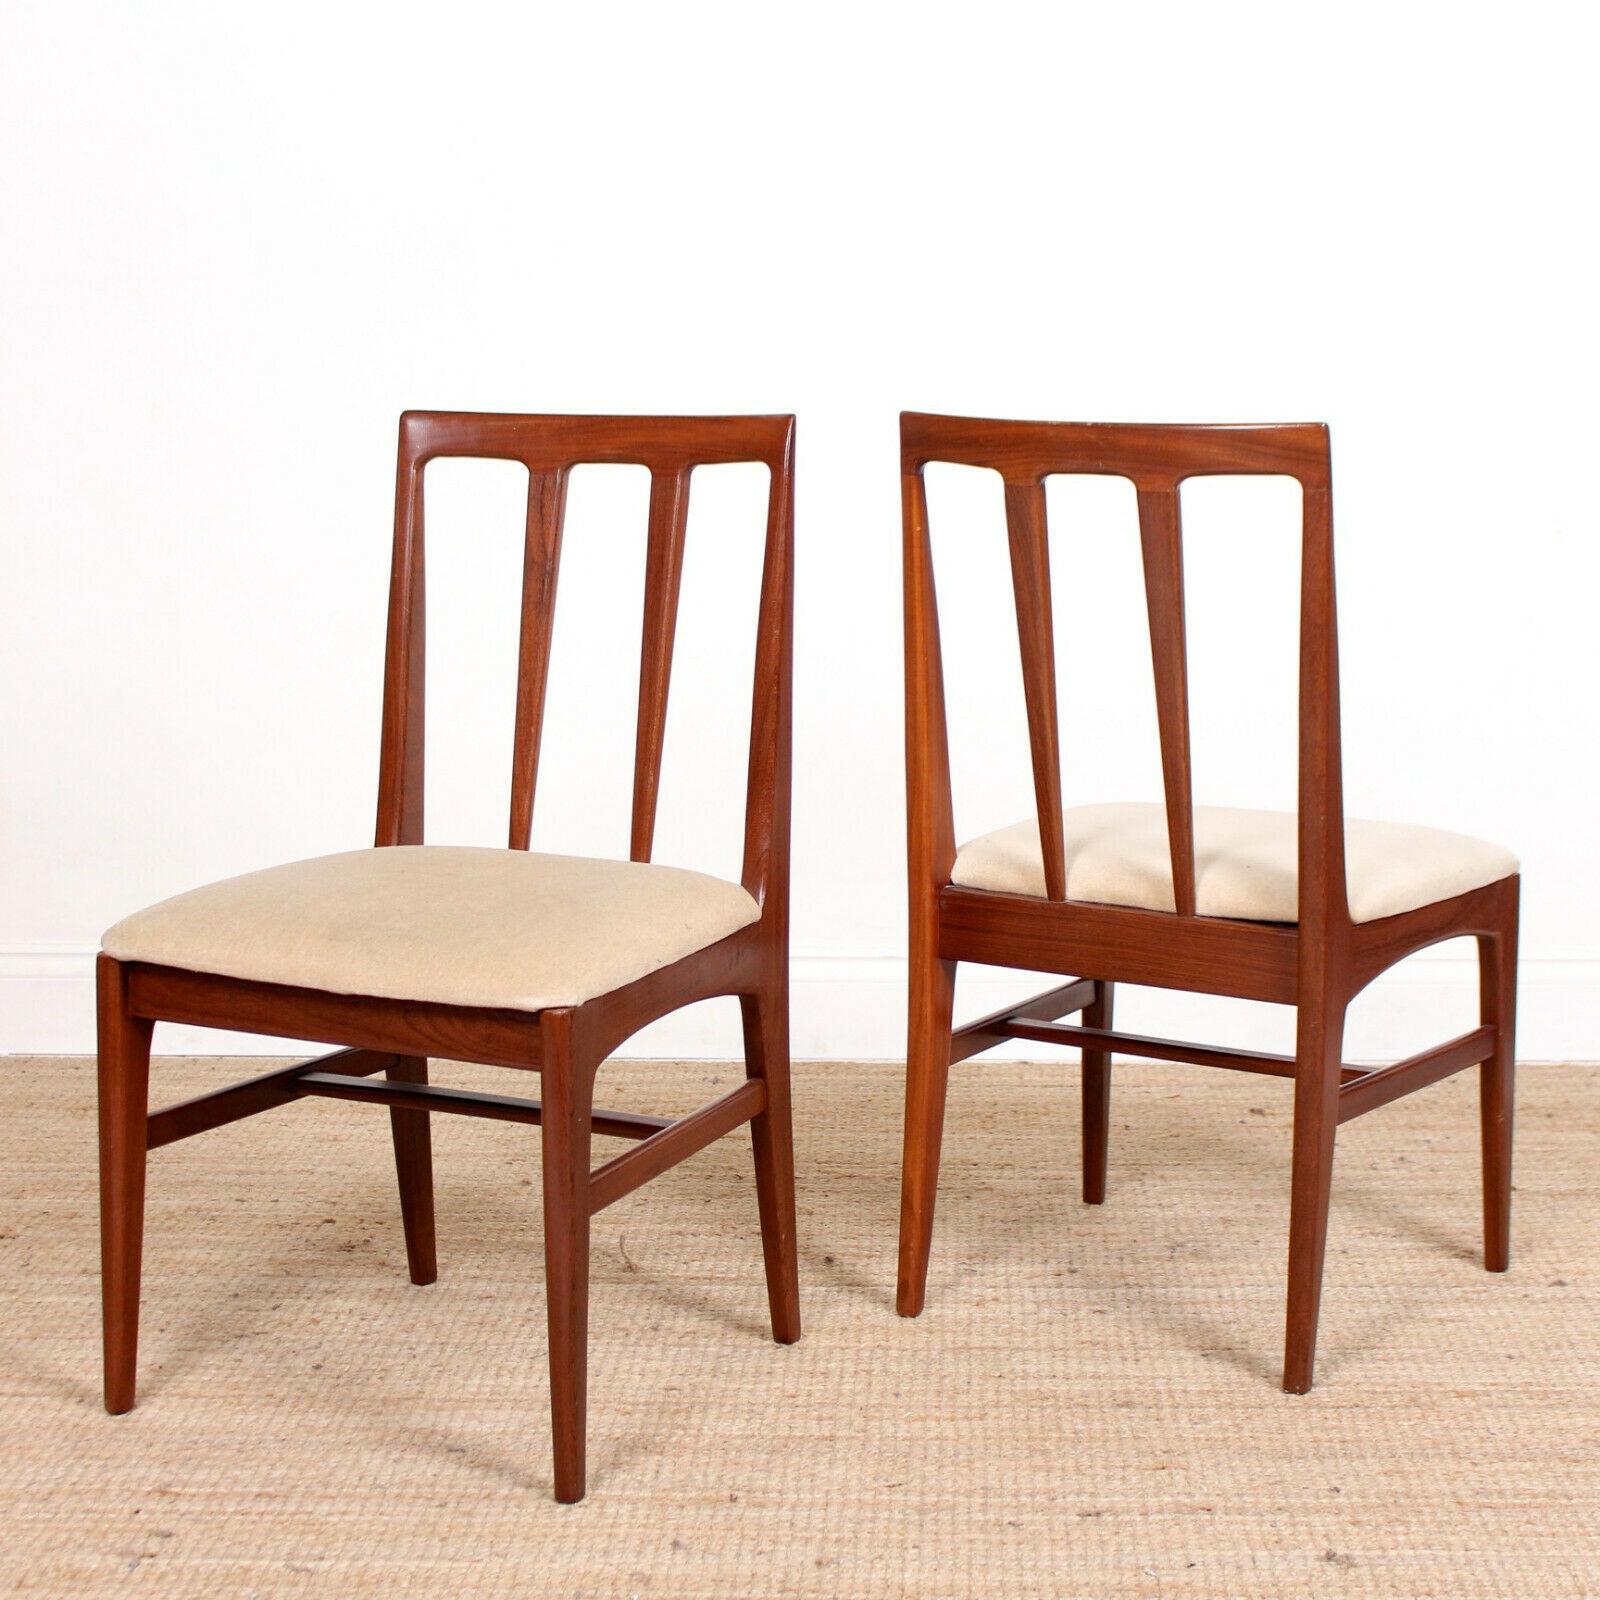 Danish Teak Dining Table and Chairs Mid-Century Modern 4 Chairs 2